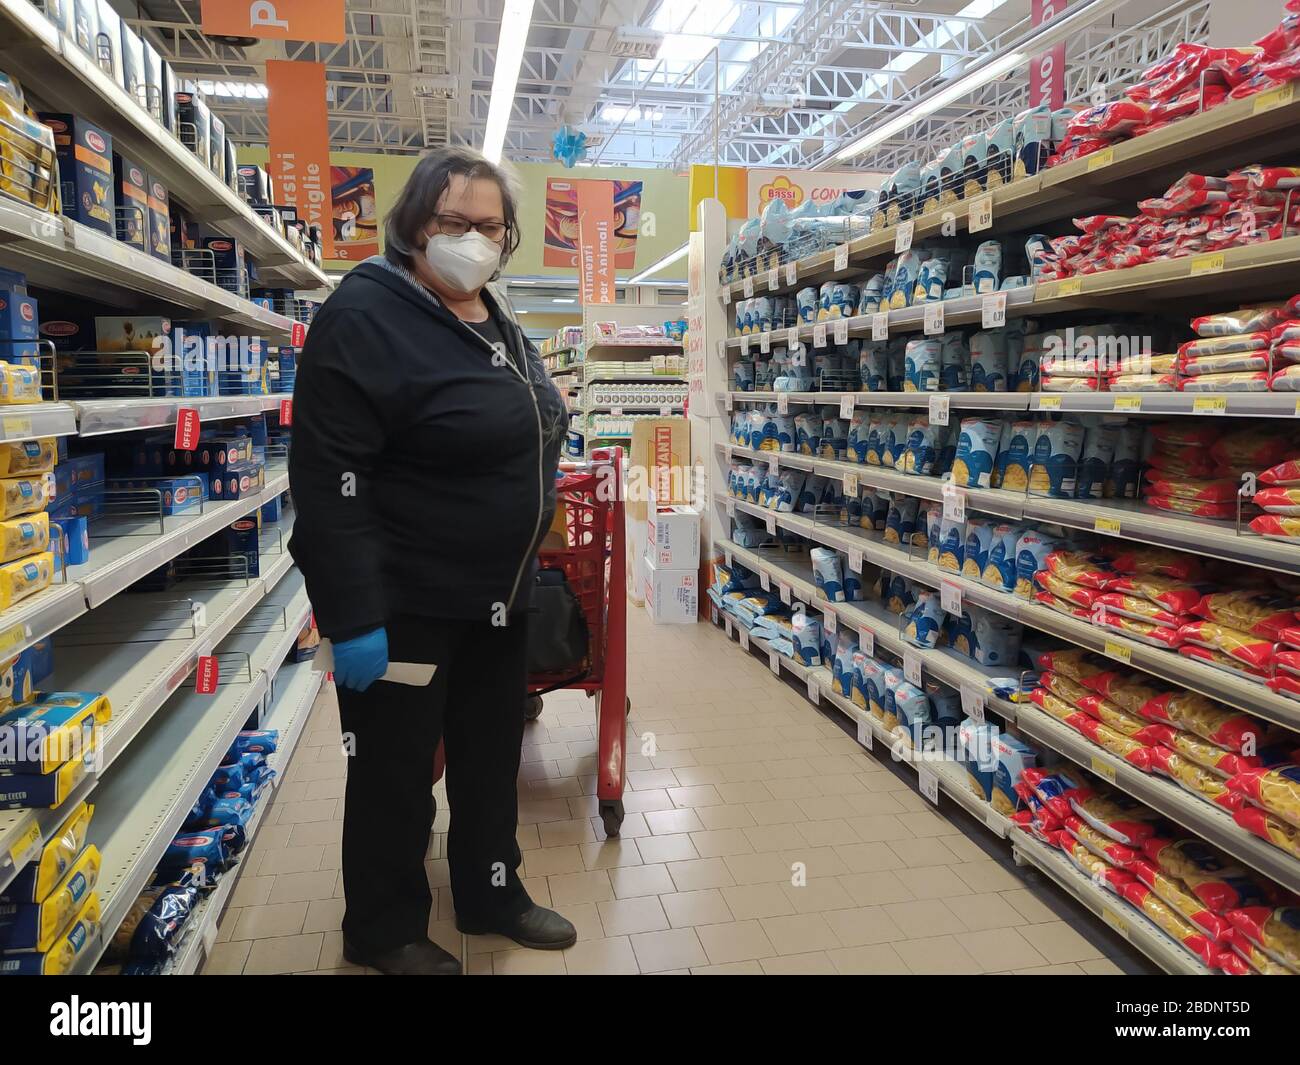 A woman buys food and drinks inside a large shopping center.Wears mask and gloves as required by government for prevention from covid-19 . Stock Photo